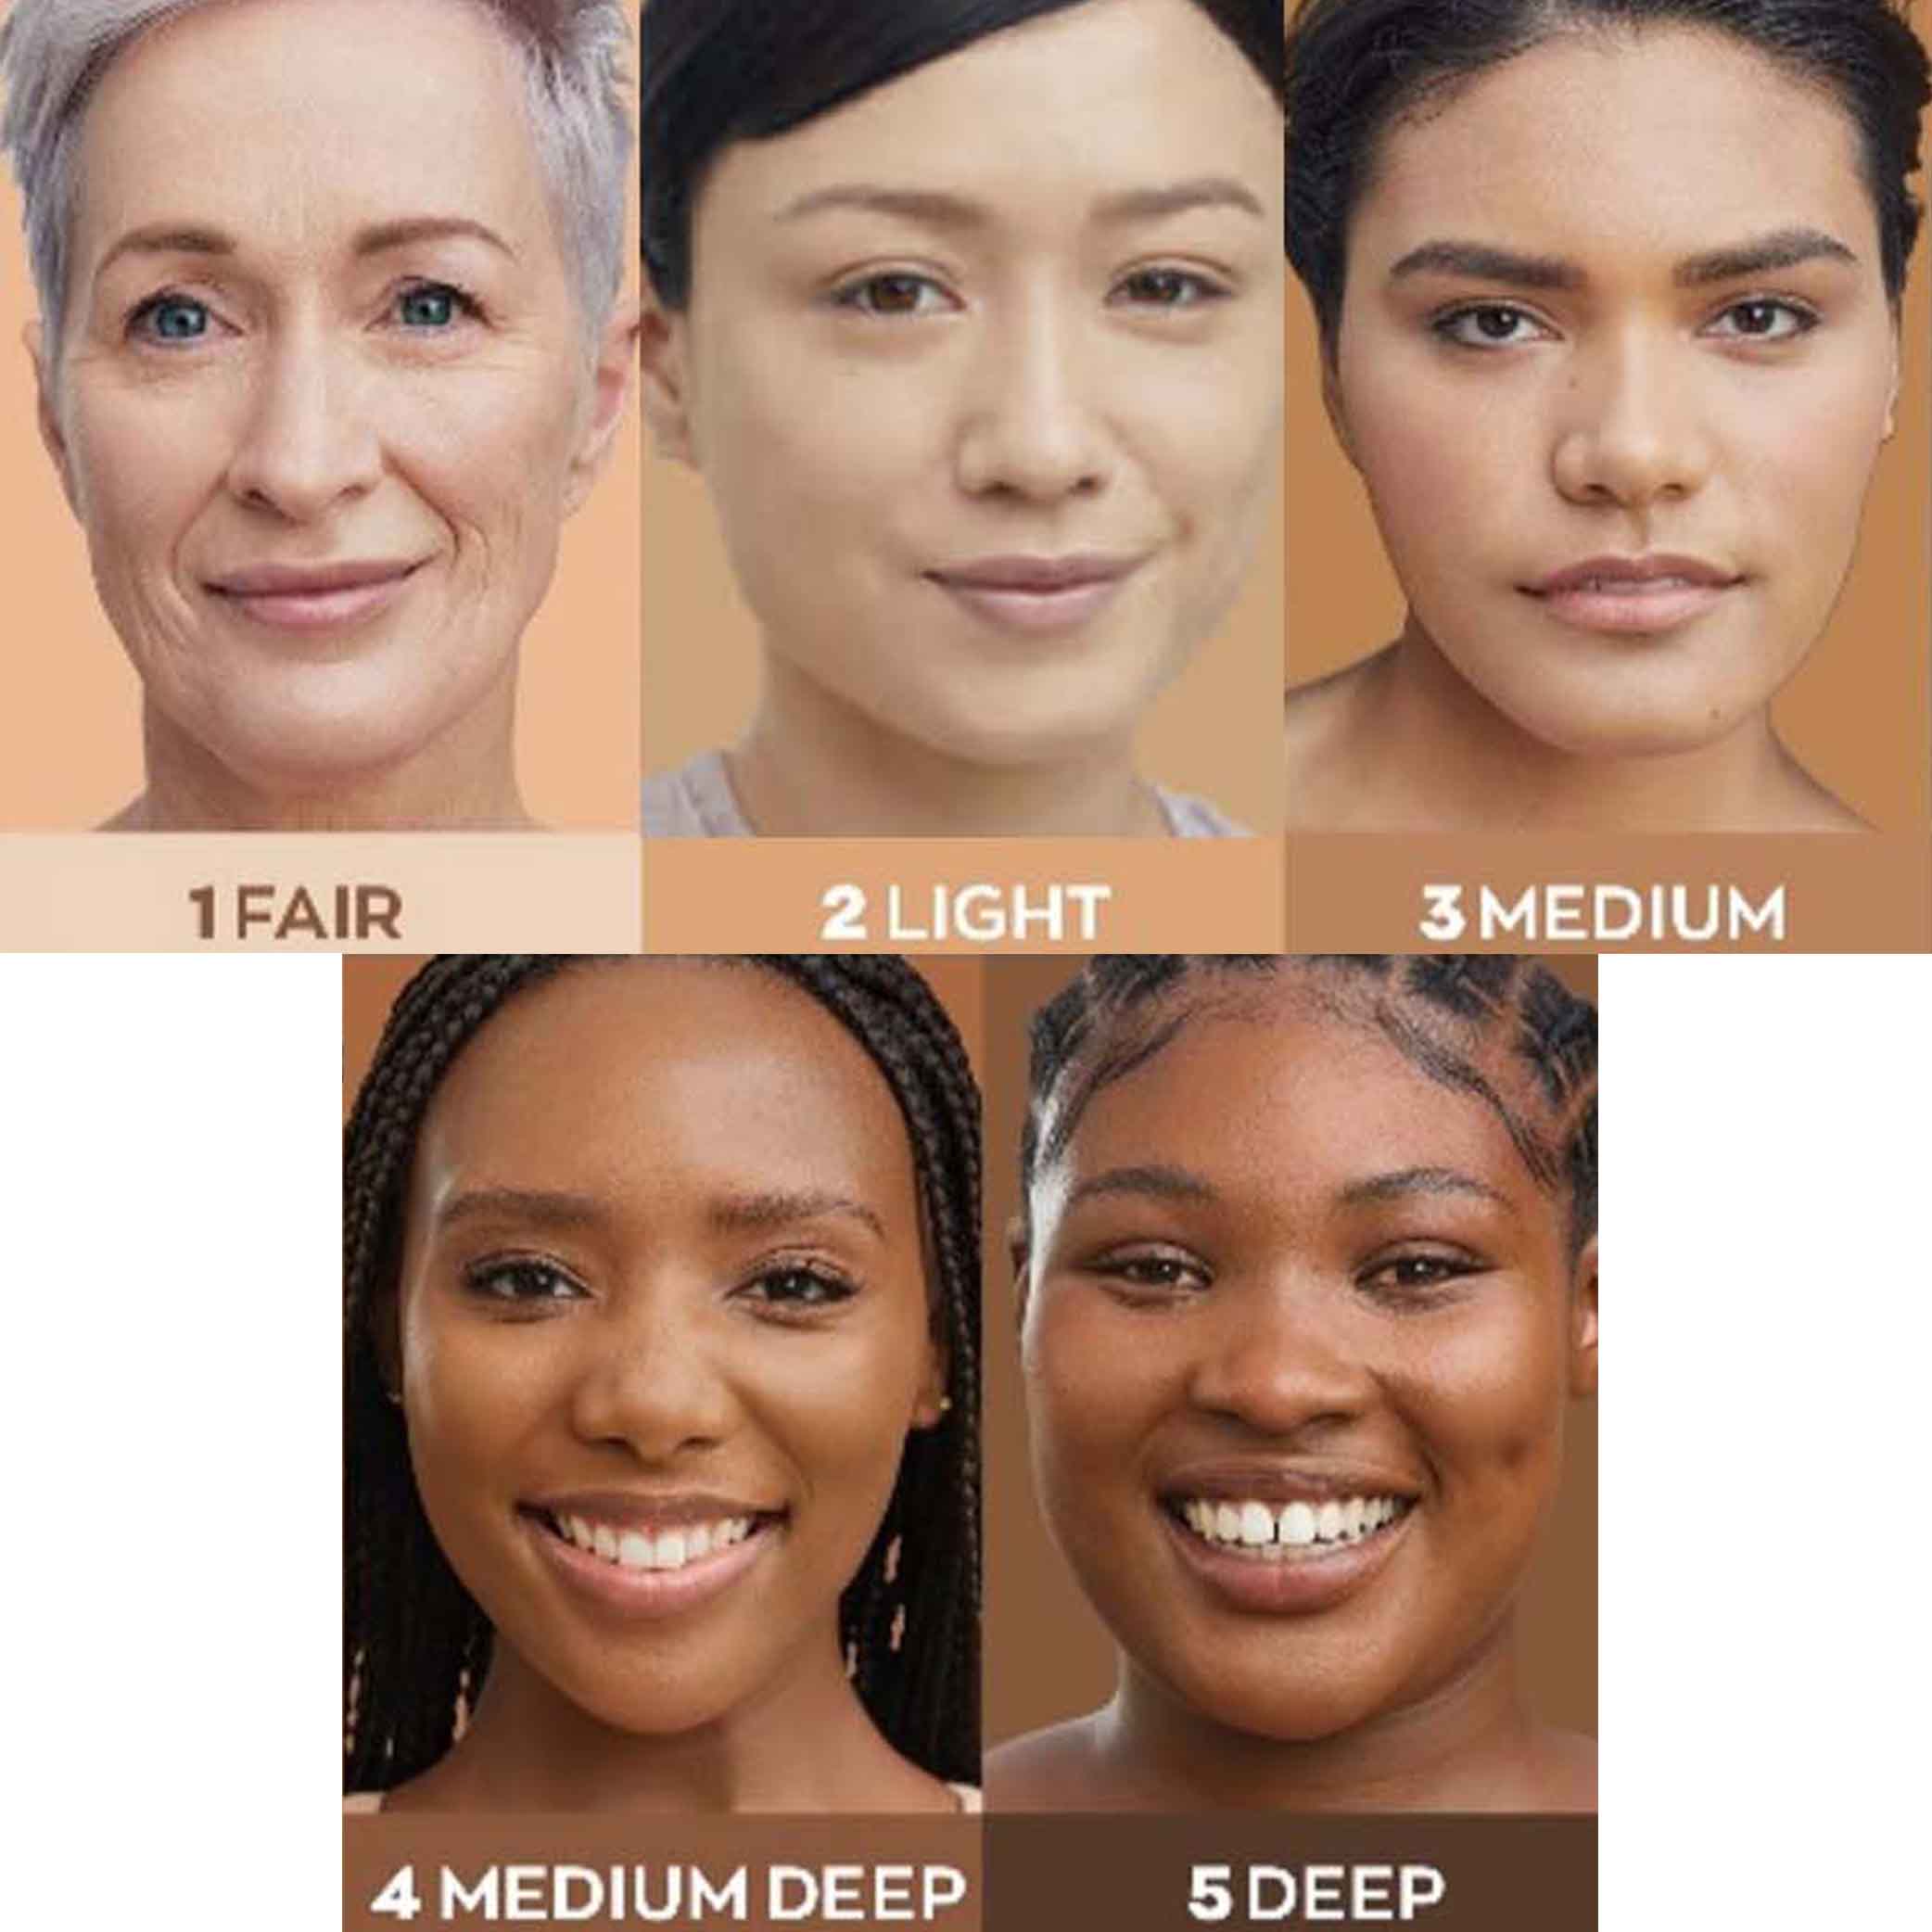 Foundation Match Up, Find Your Foundation - Makeup